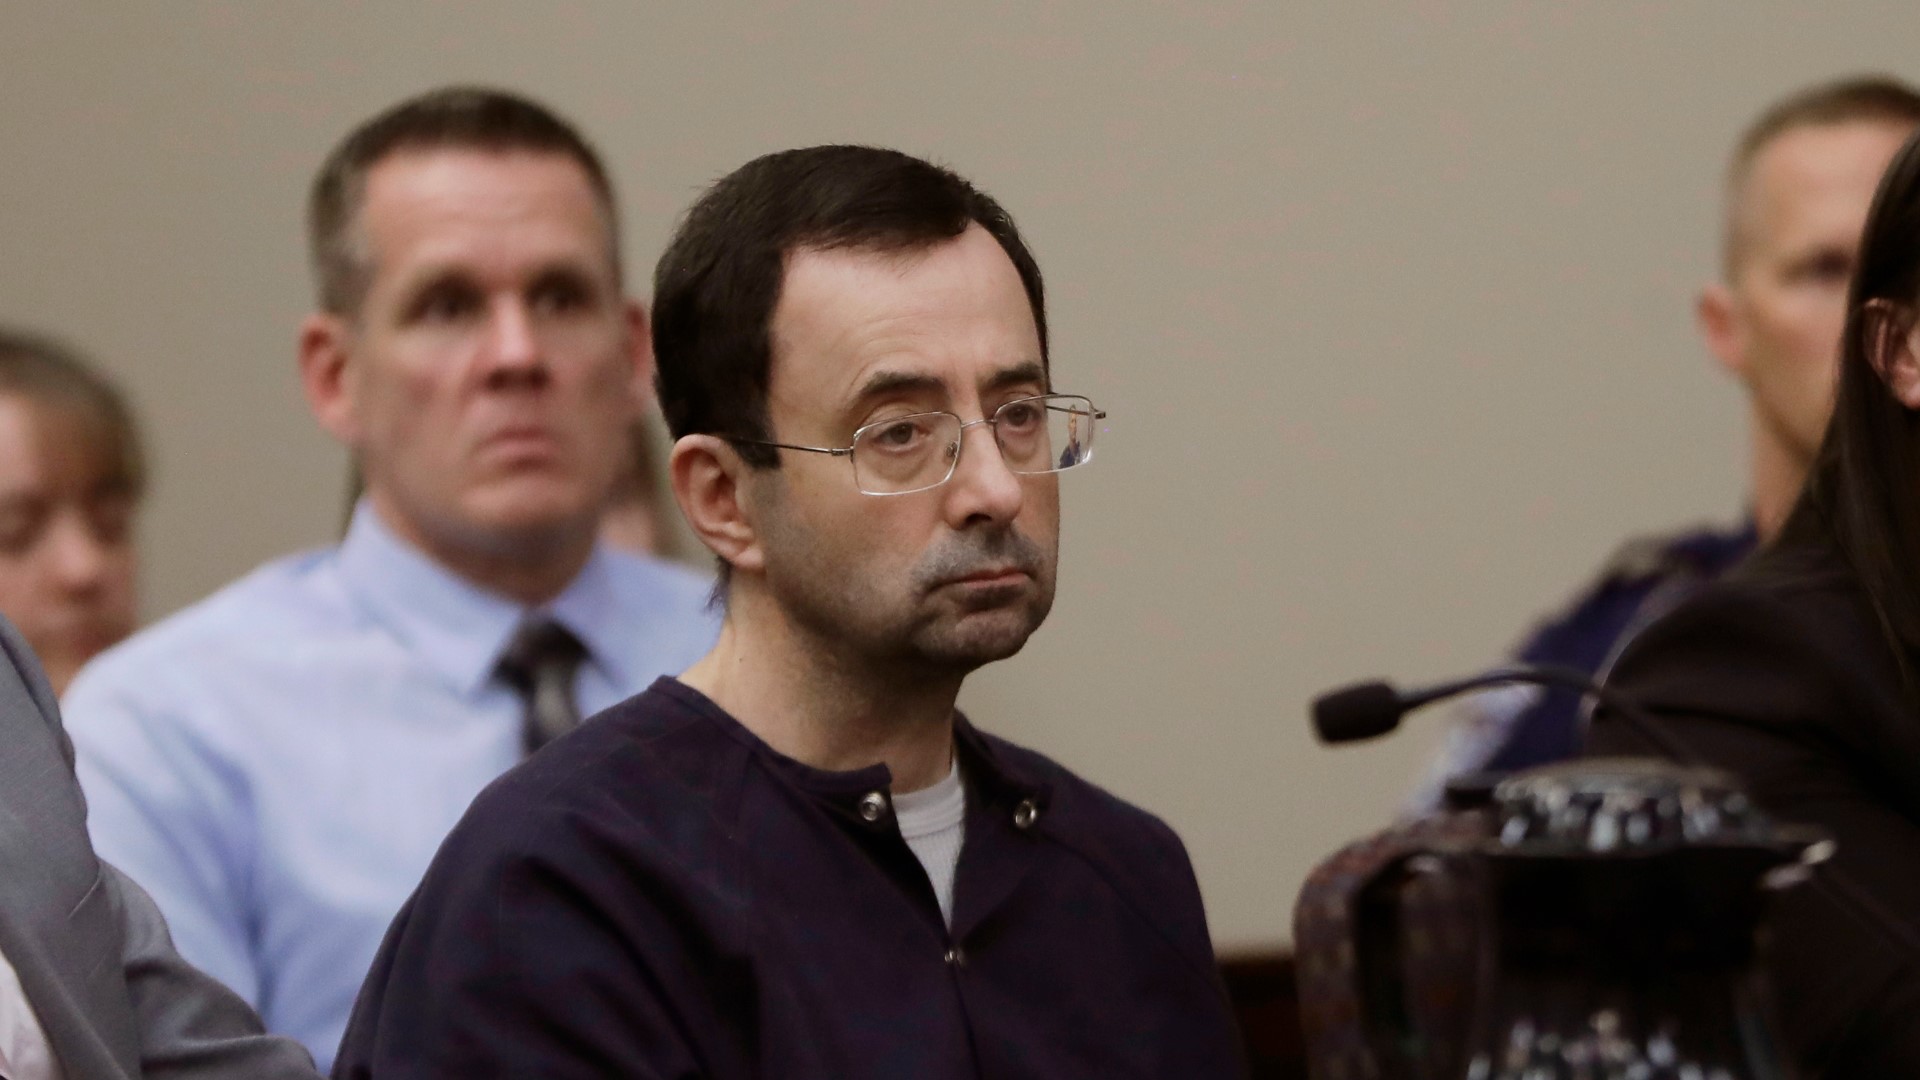 Legislation advancing in Michigan would add athletic trainers and physical therapists to the state's list of mandatory reporters of child abuse and neglect in the wake of the Larry Nassar scandal.